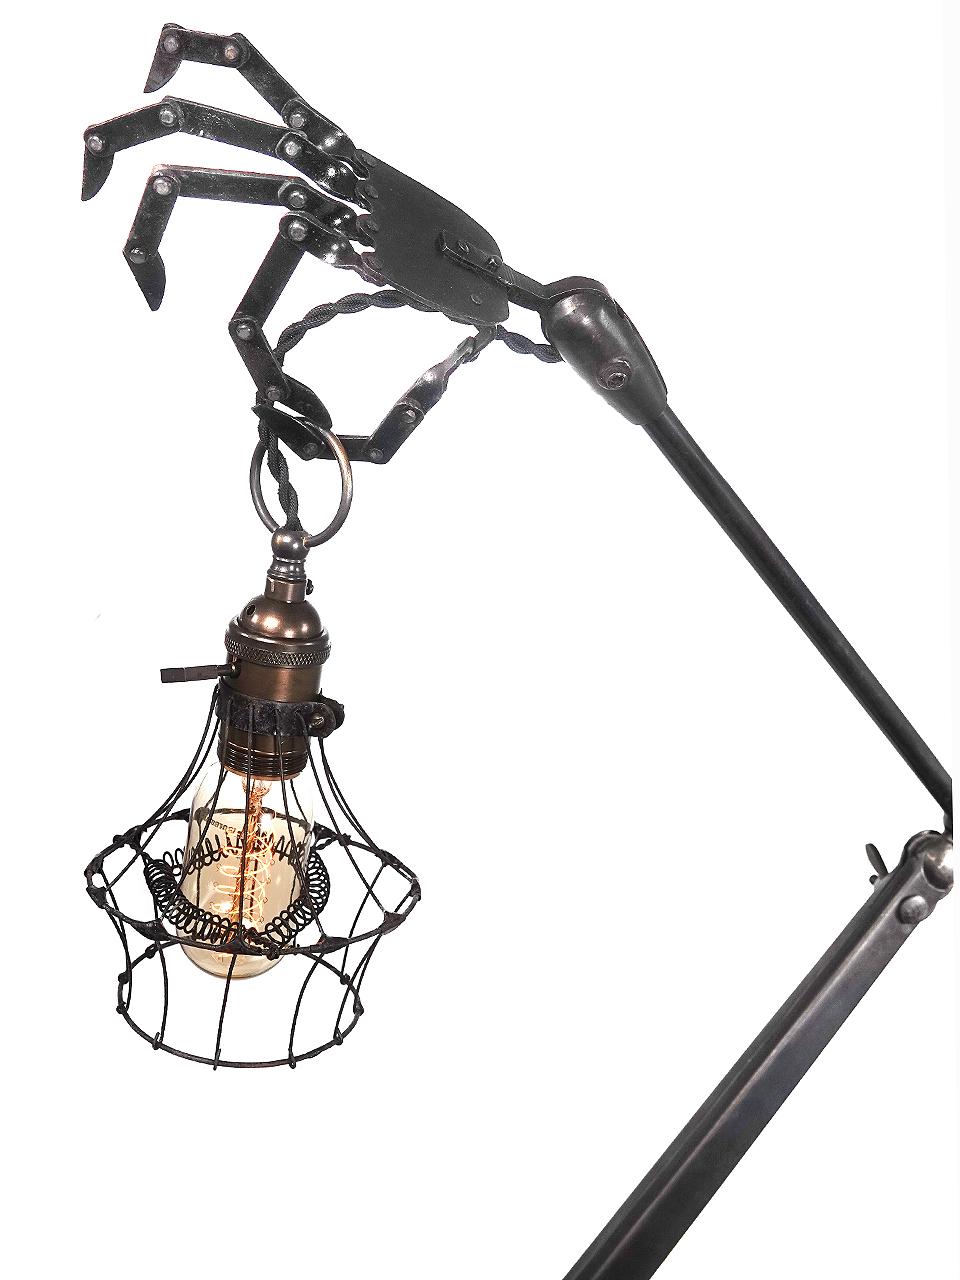 These amazing desk lamps will become the focal point of any room it's placed in. It's a bit Steampunk, Adams family and the nightmare before Xmas rolled into one. All the joints including four on each brass finger are articulated and can be posed